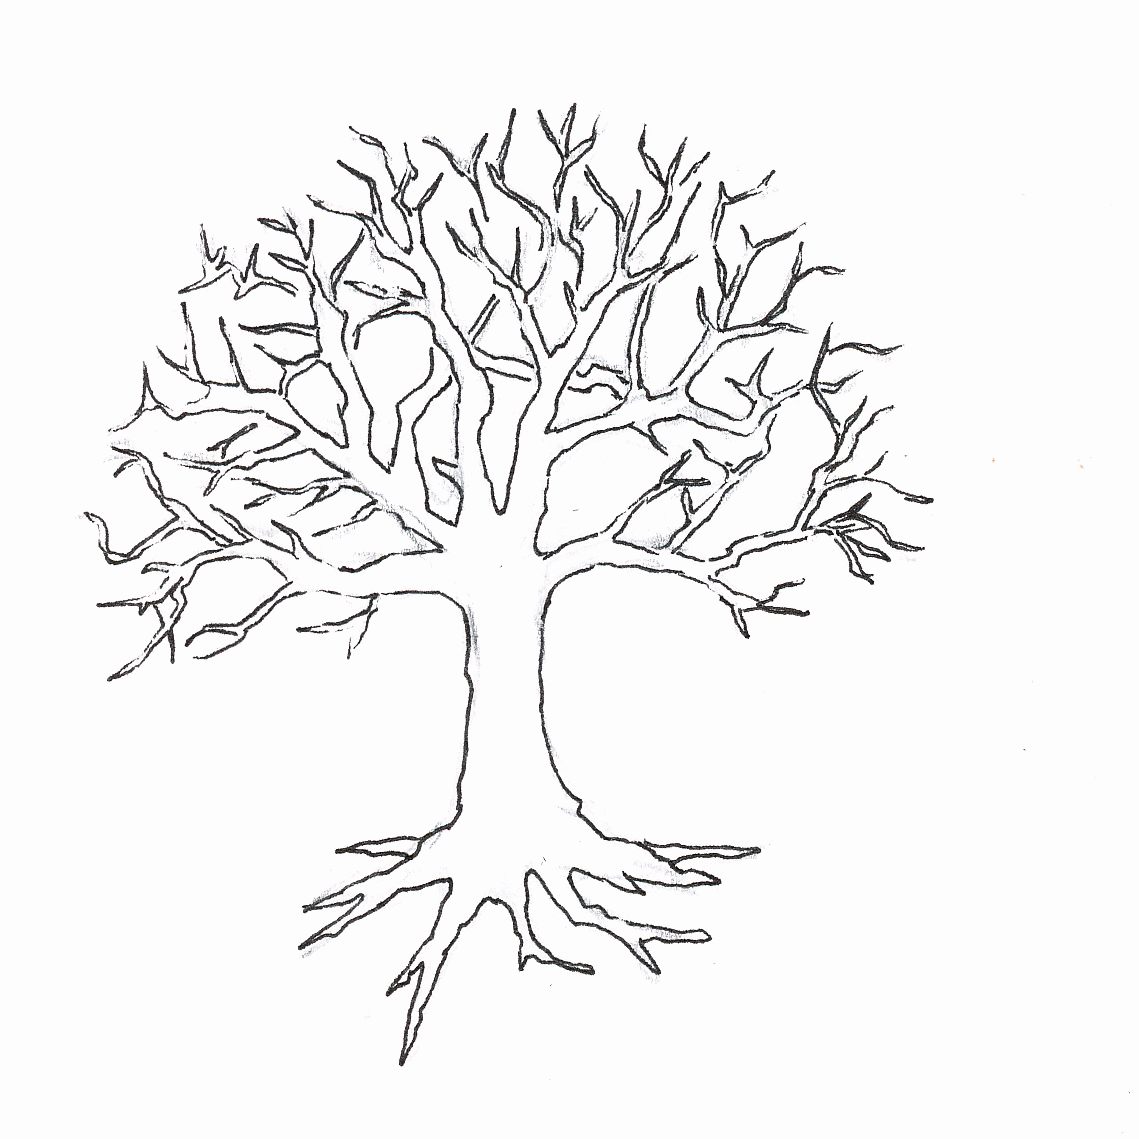 Coloring Page Of A Tree Without Leaves - Coloring - Coloring Home